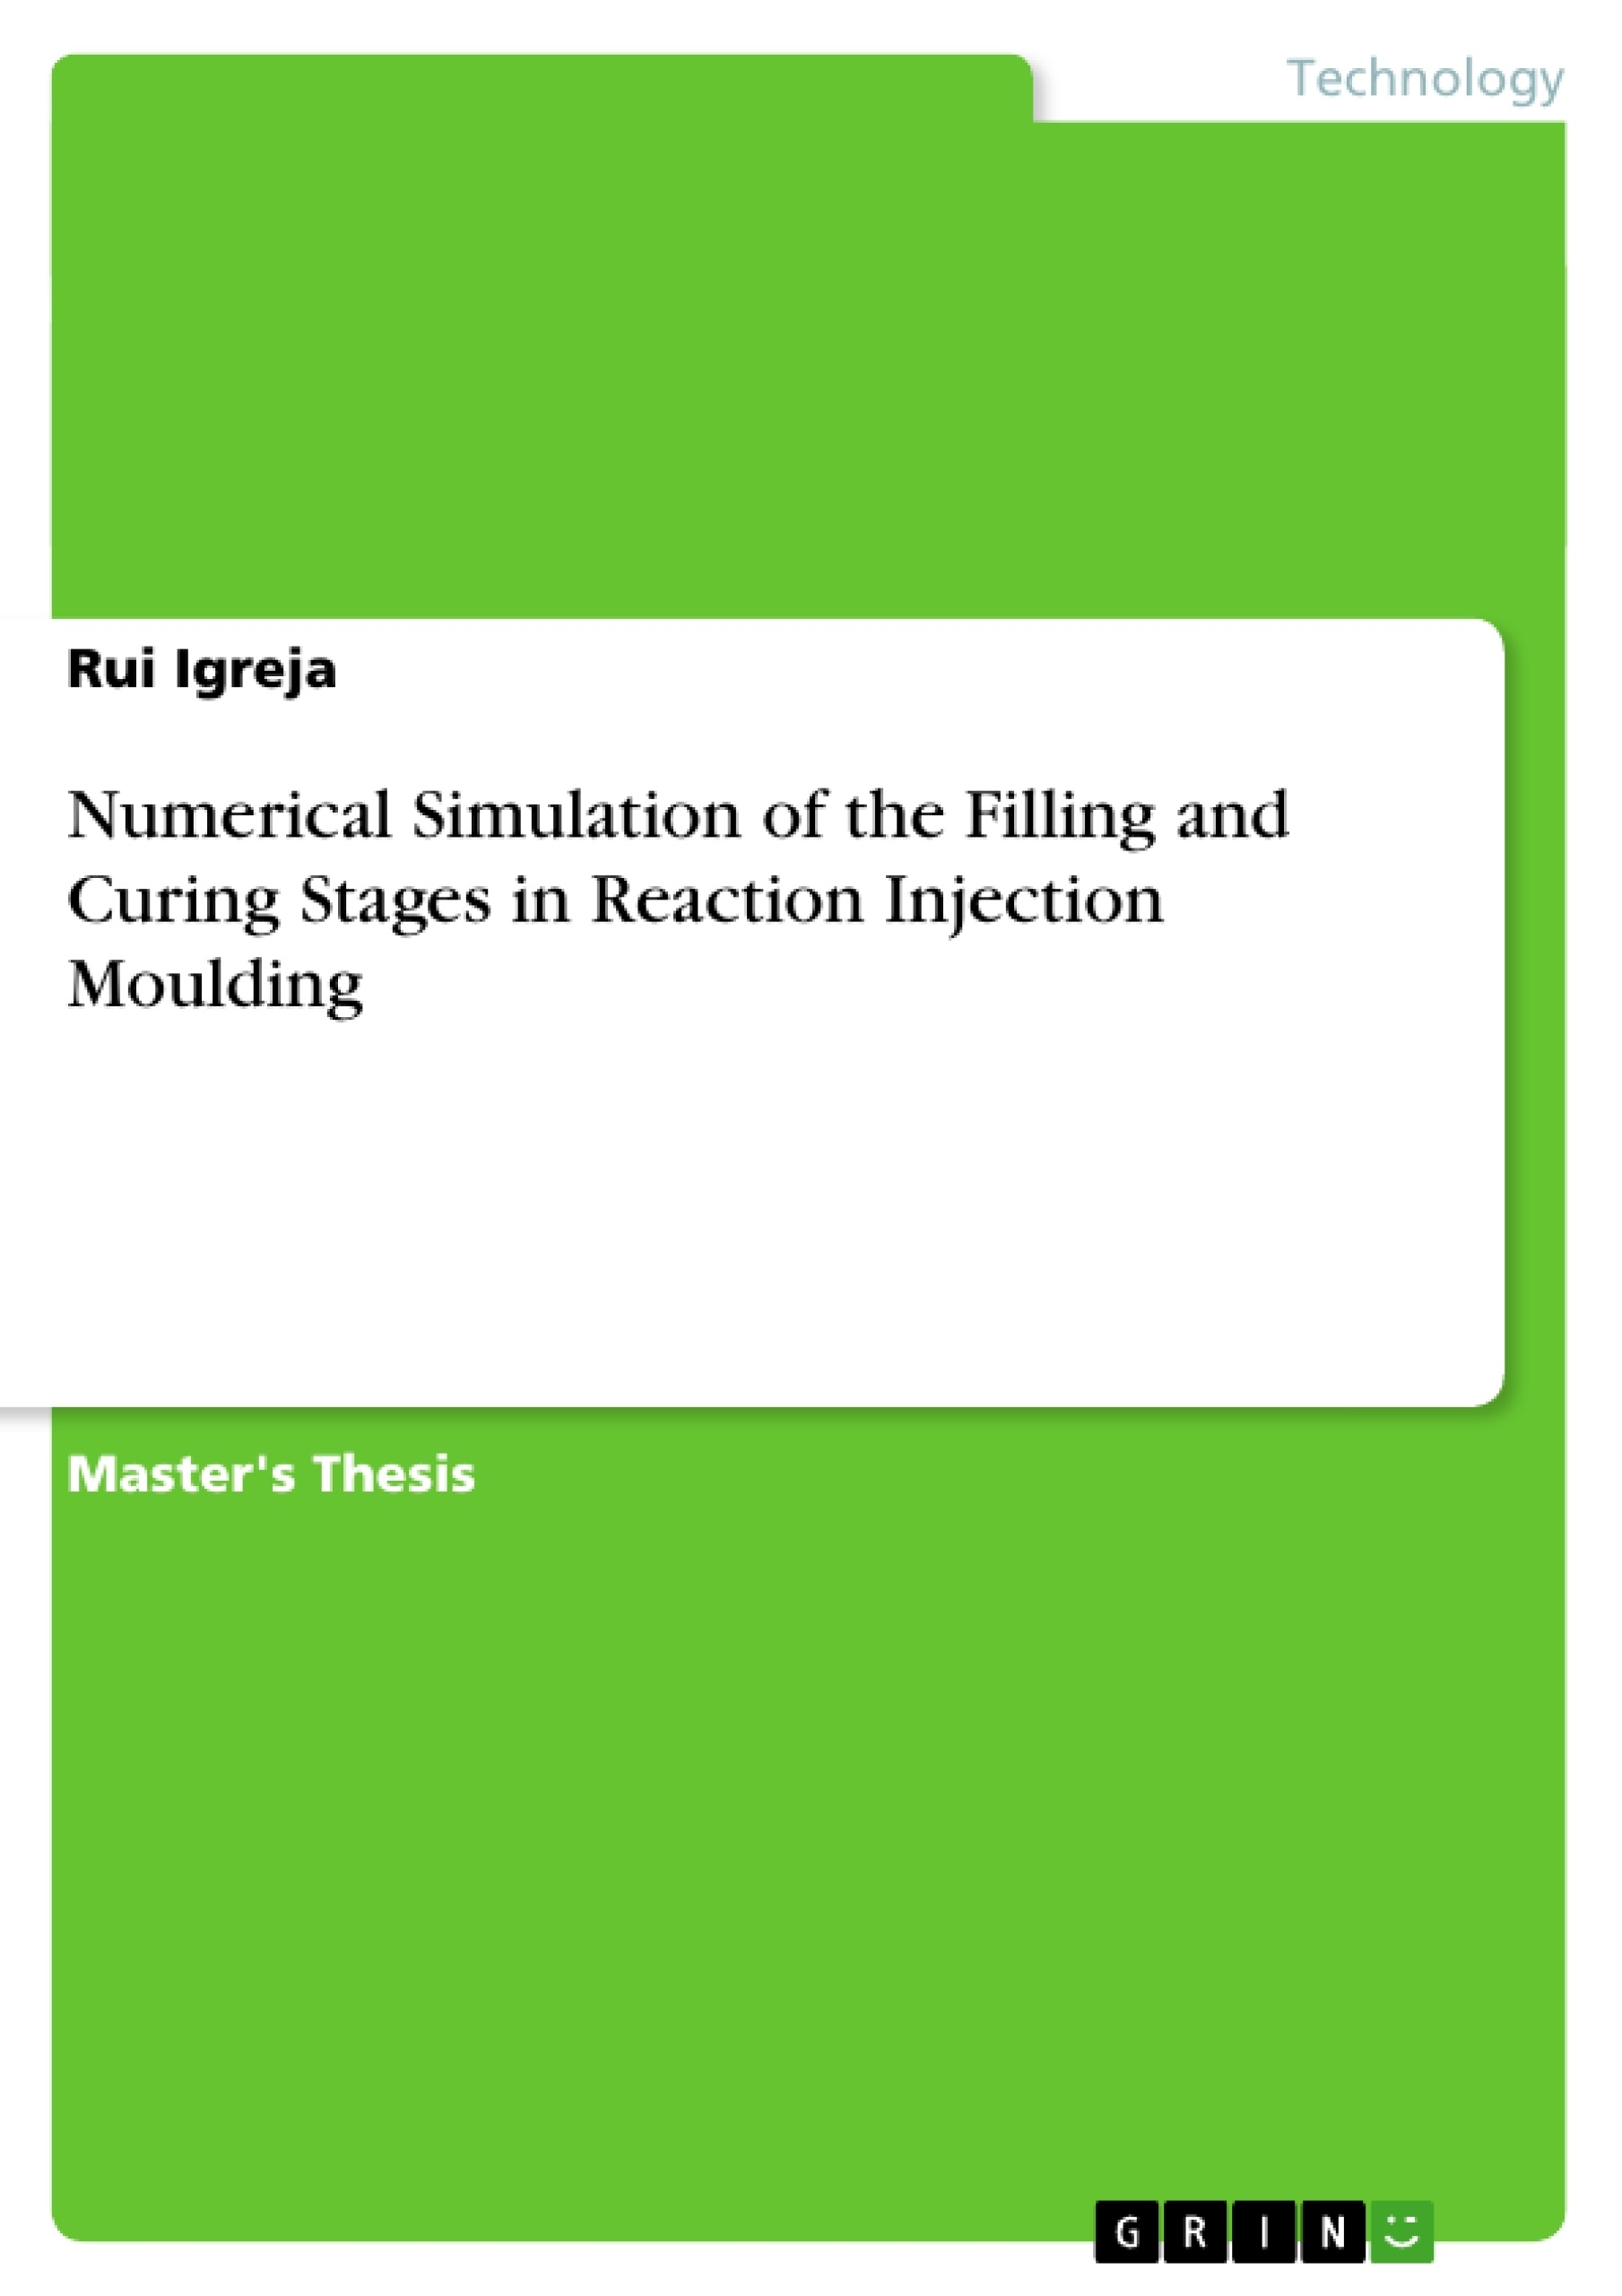 Title: Numerical Simulation of the Filling and Curing Stages in Reaction Injection Moulding